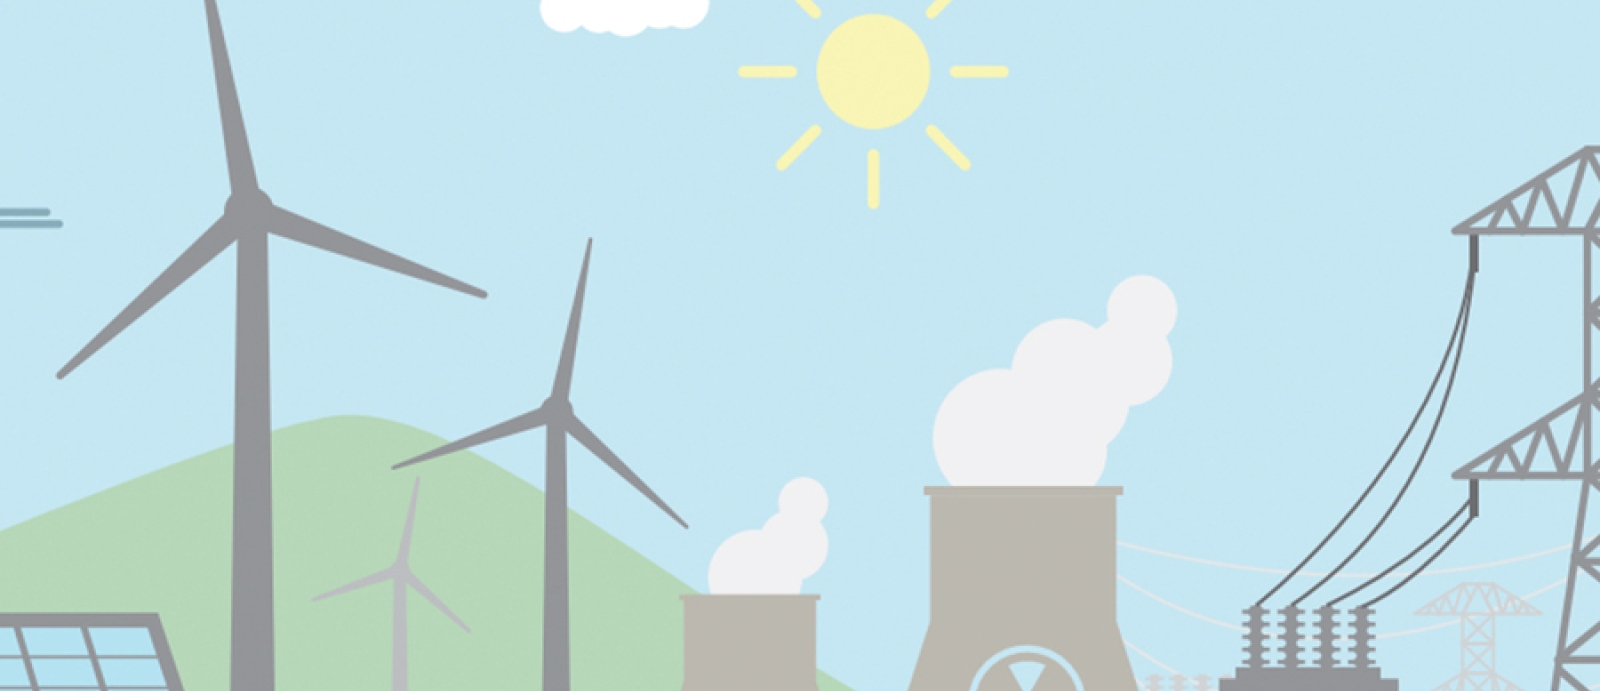 An illustration depicting different forms of energy -- solar panels, wind turbines, nuclear power plants, and electrical power plants. They are all drawn on a green lawn, with a green hills in the background, and a blue sunny sky. 